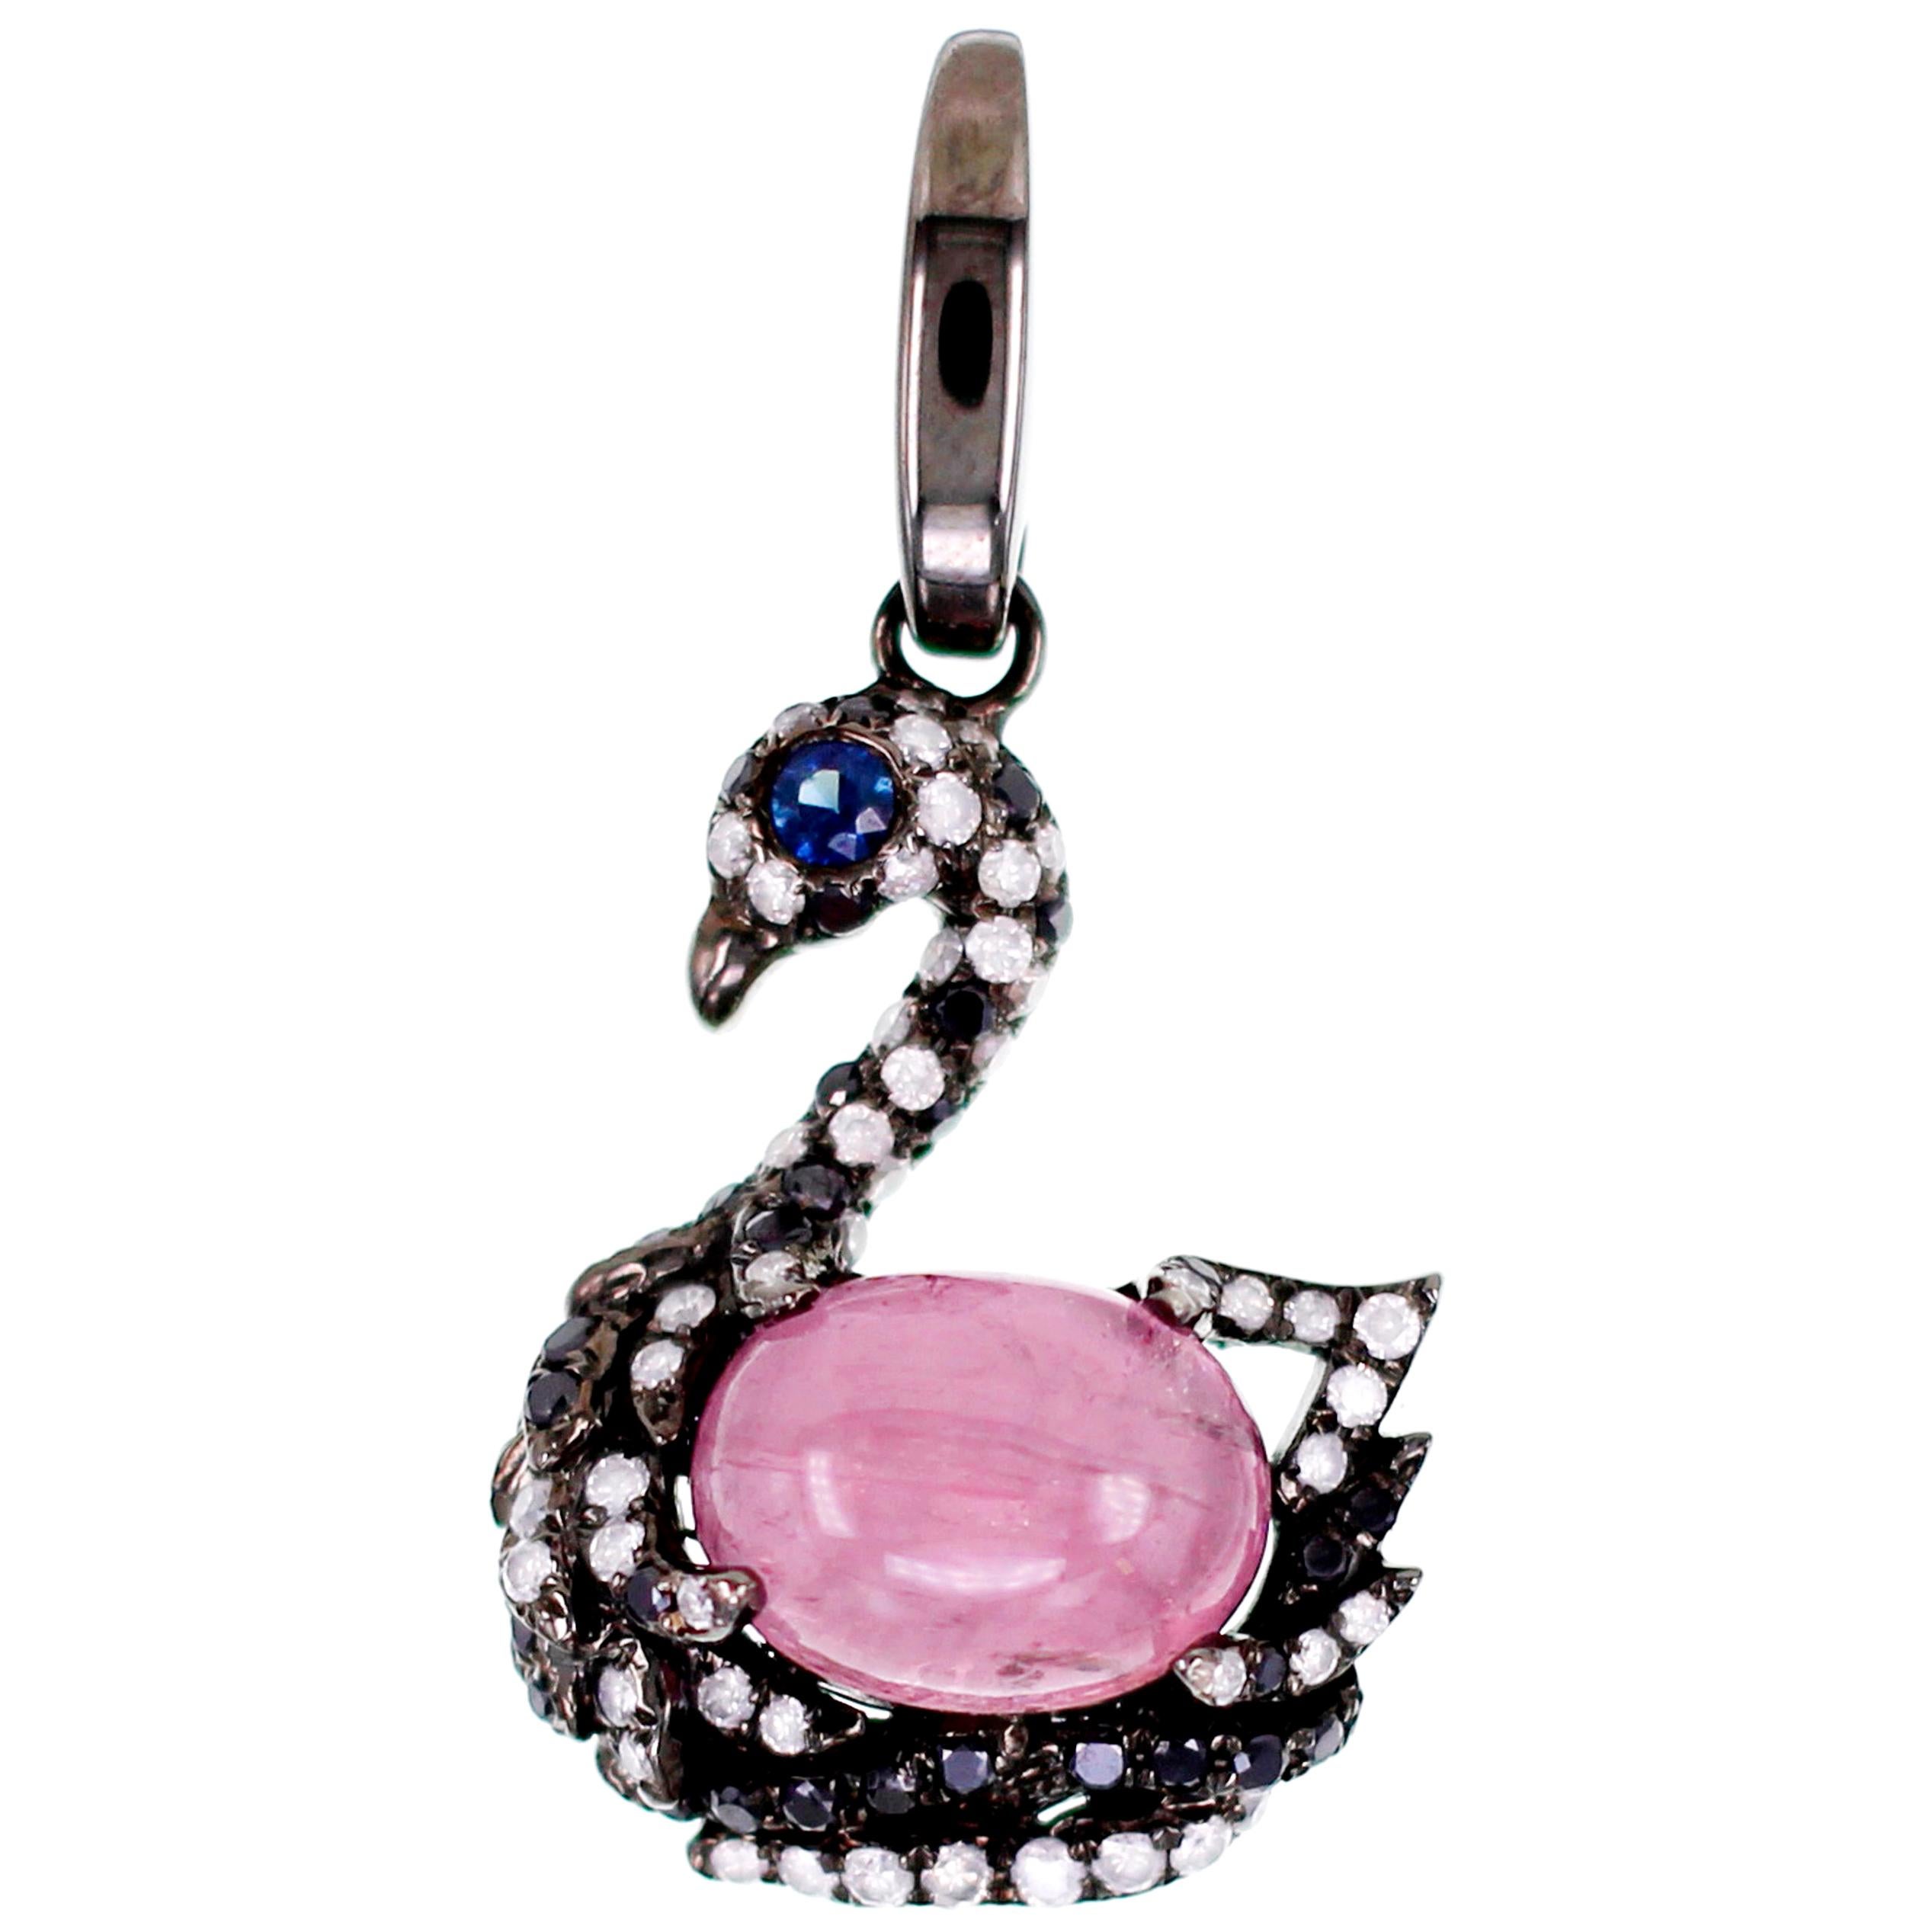 Good Luck Swan Pendant with a Pastel Afghan Pink Tourmaline